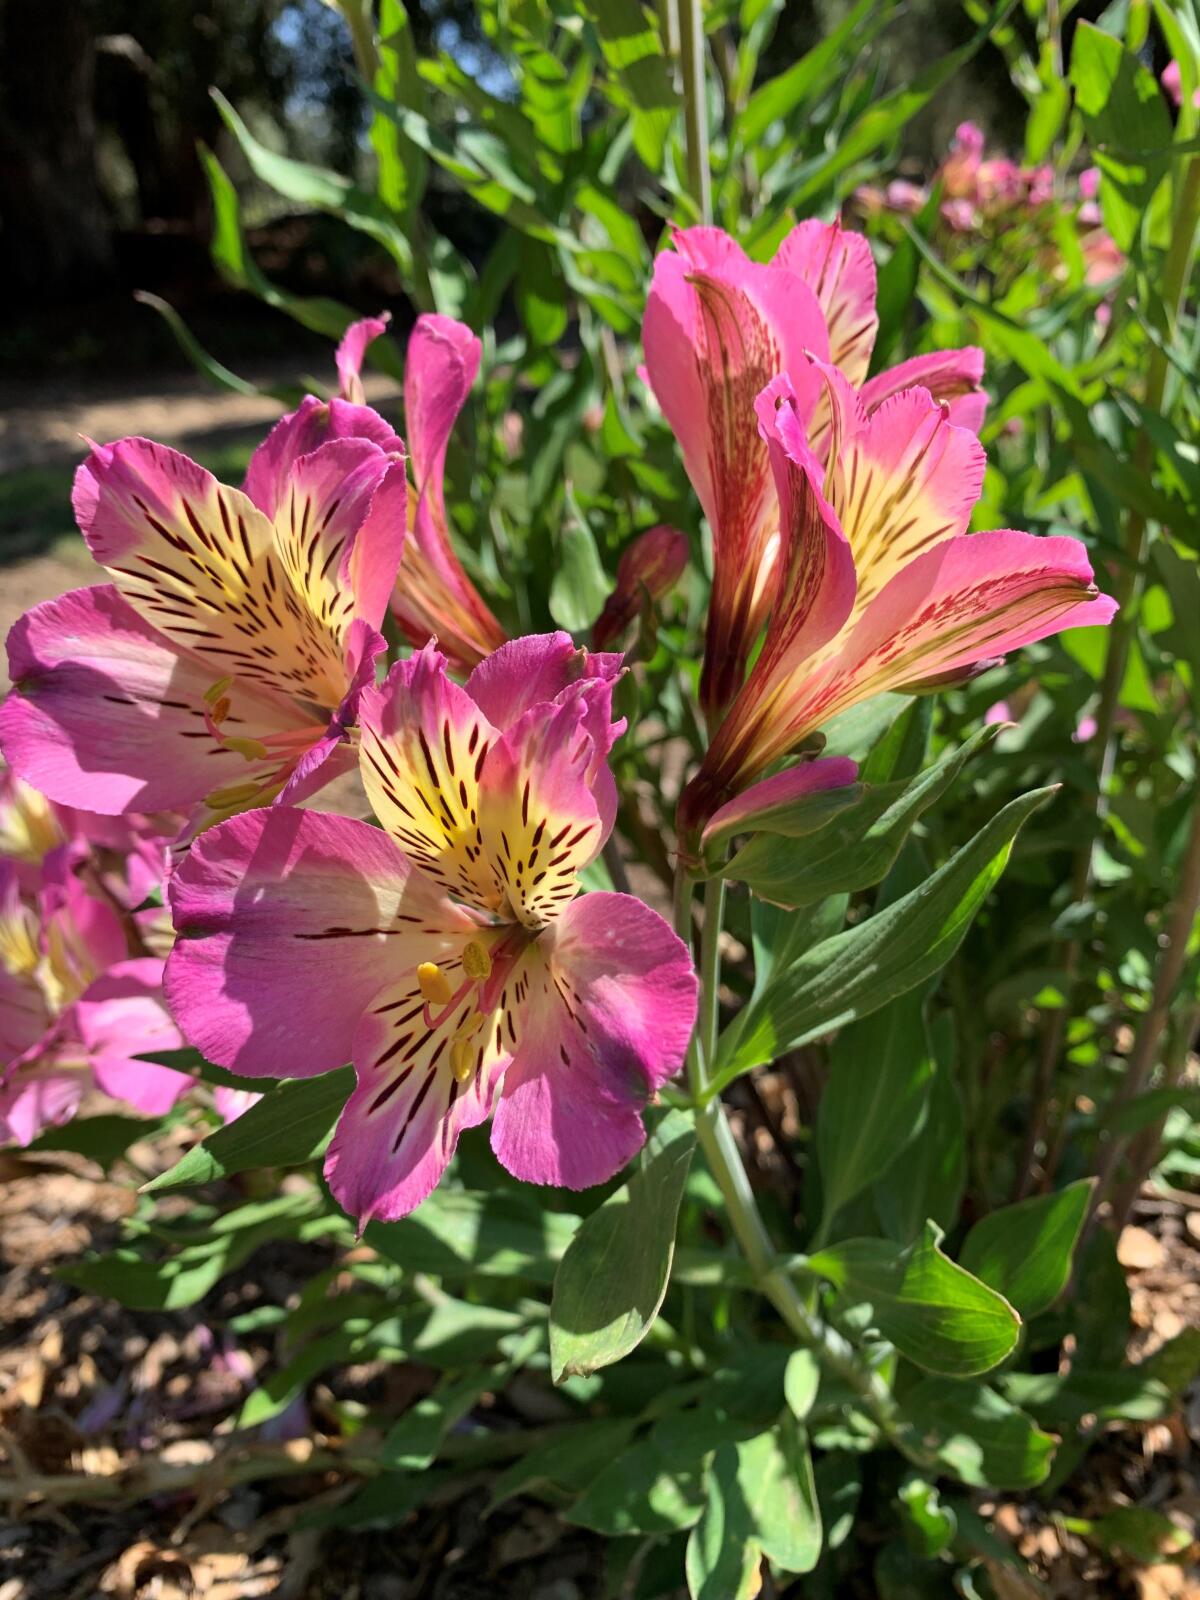 Alstromeria blooms from late spring to summer and can come in orange, pink, purple, red, yellow, and white.